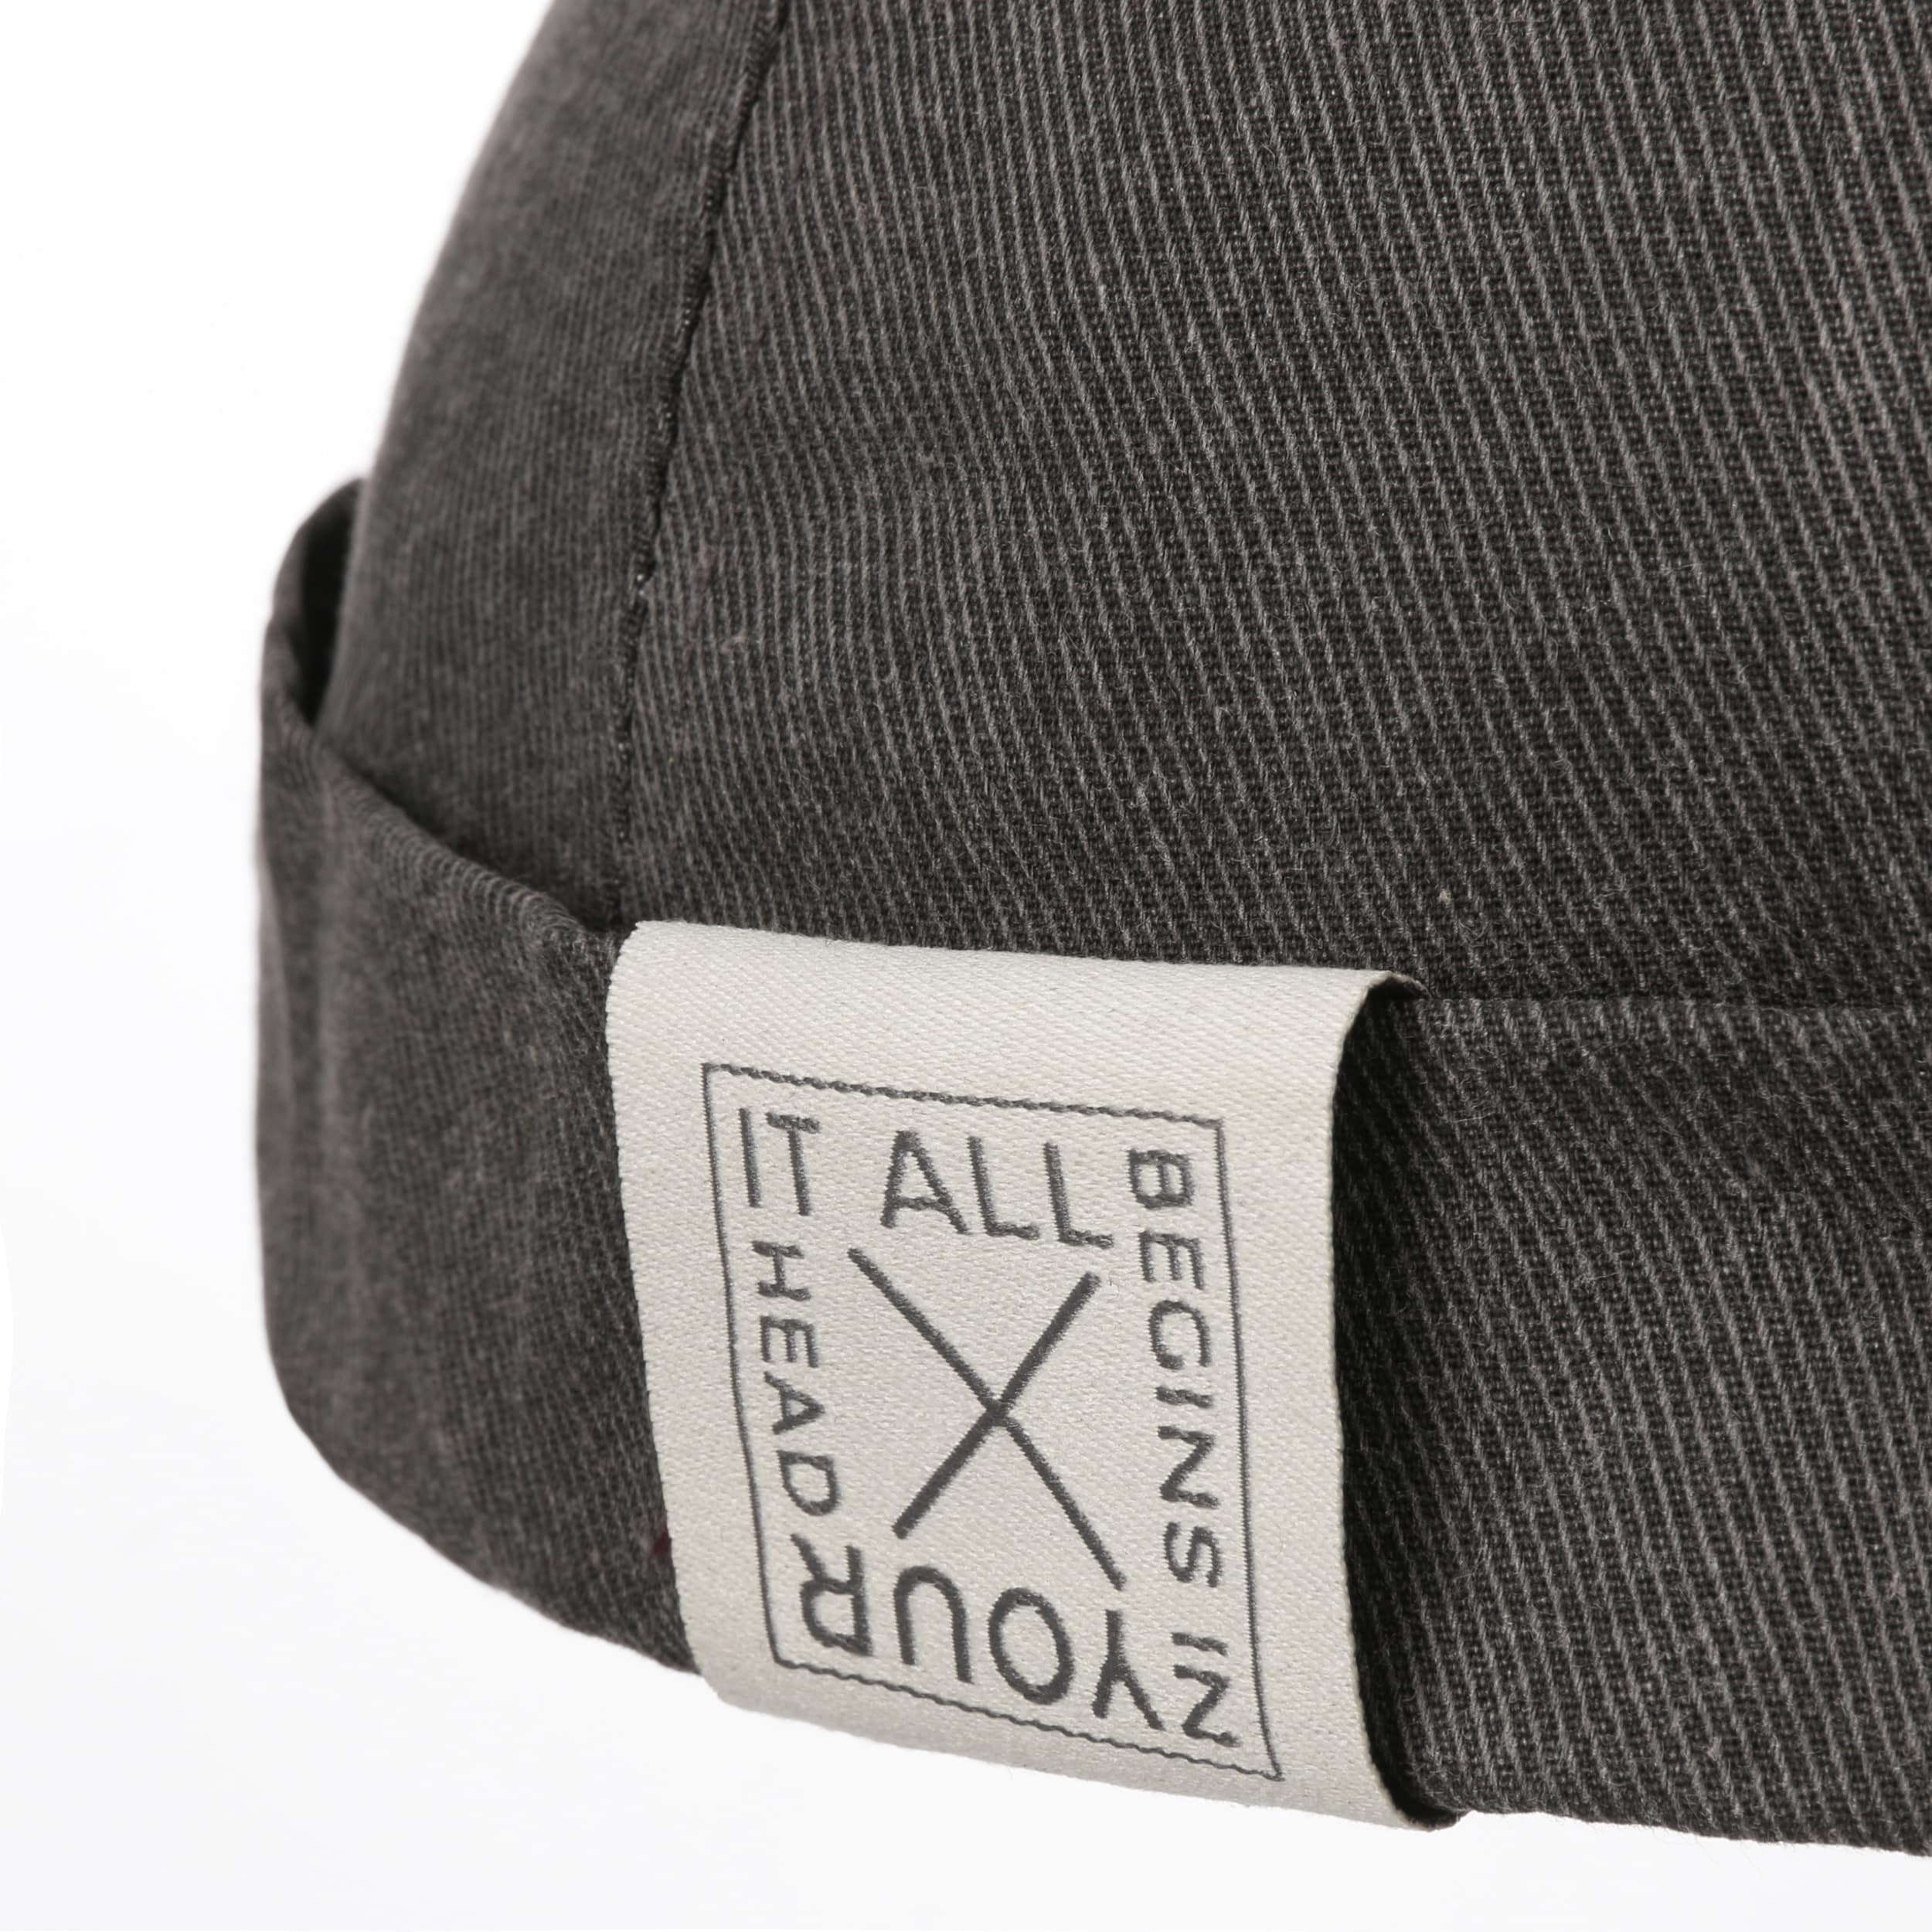 by - Docker Hat Yao Chillouts € 26,95